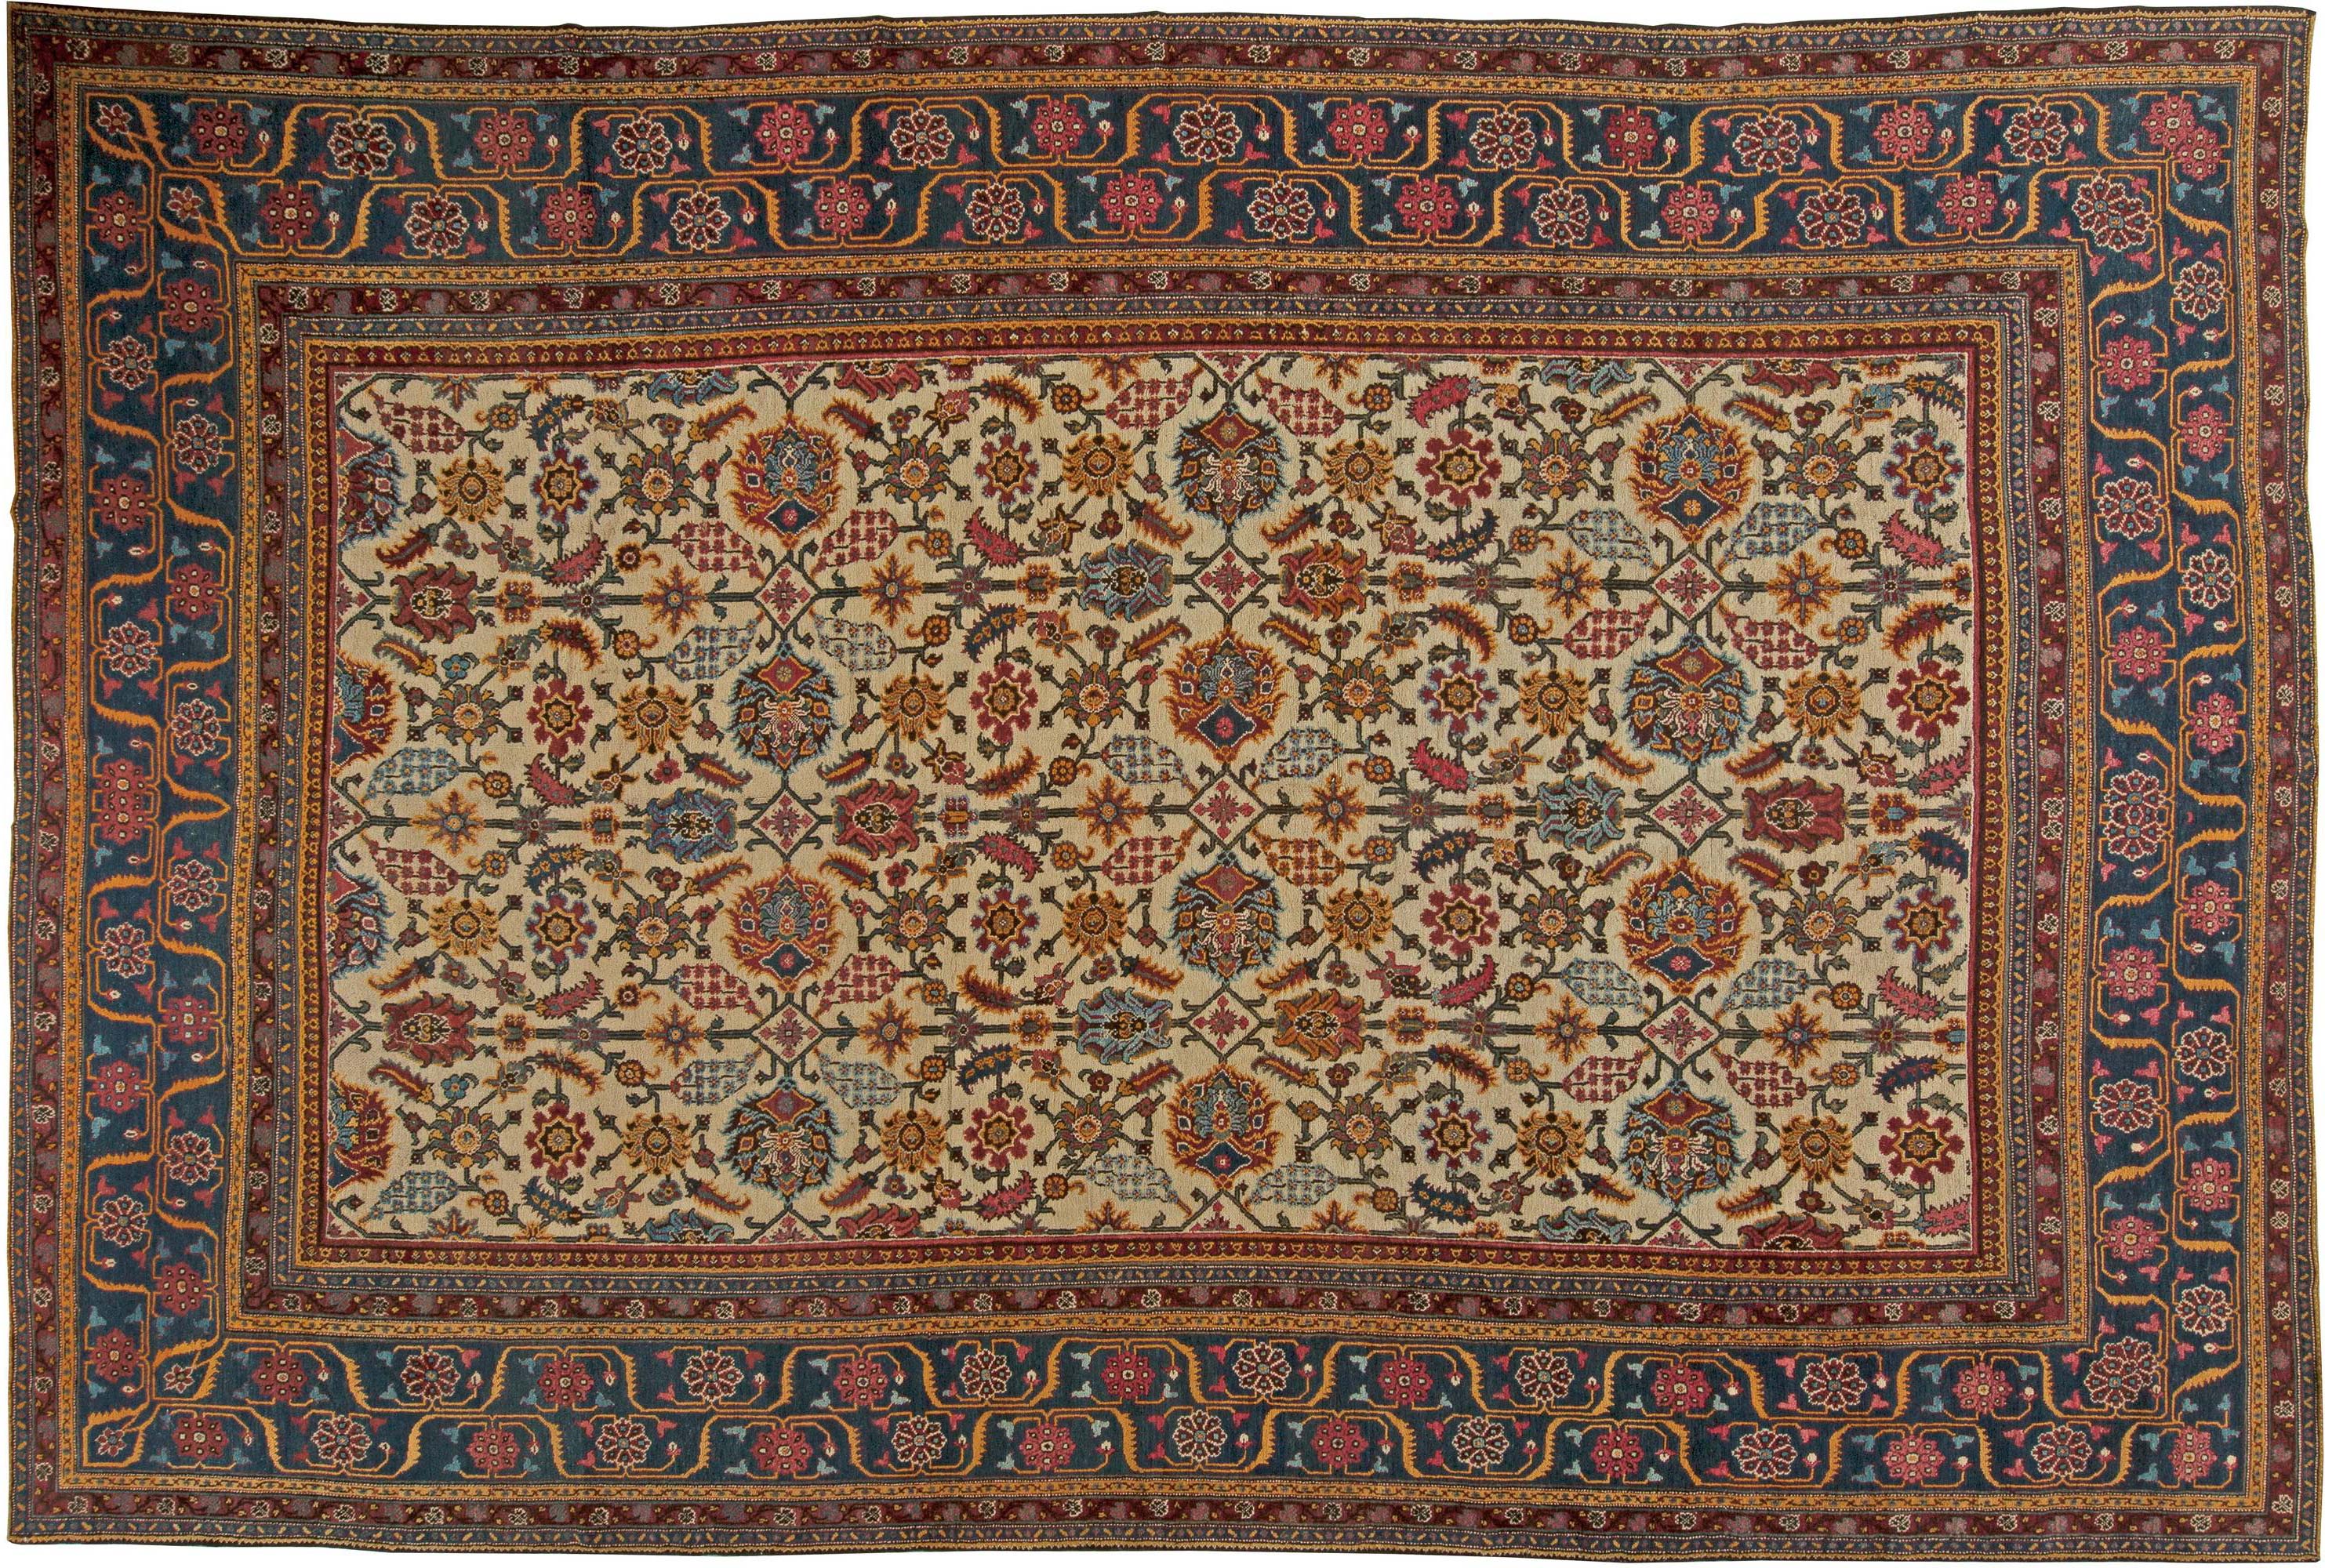 Antique Indian Rug BB5669 by DLB